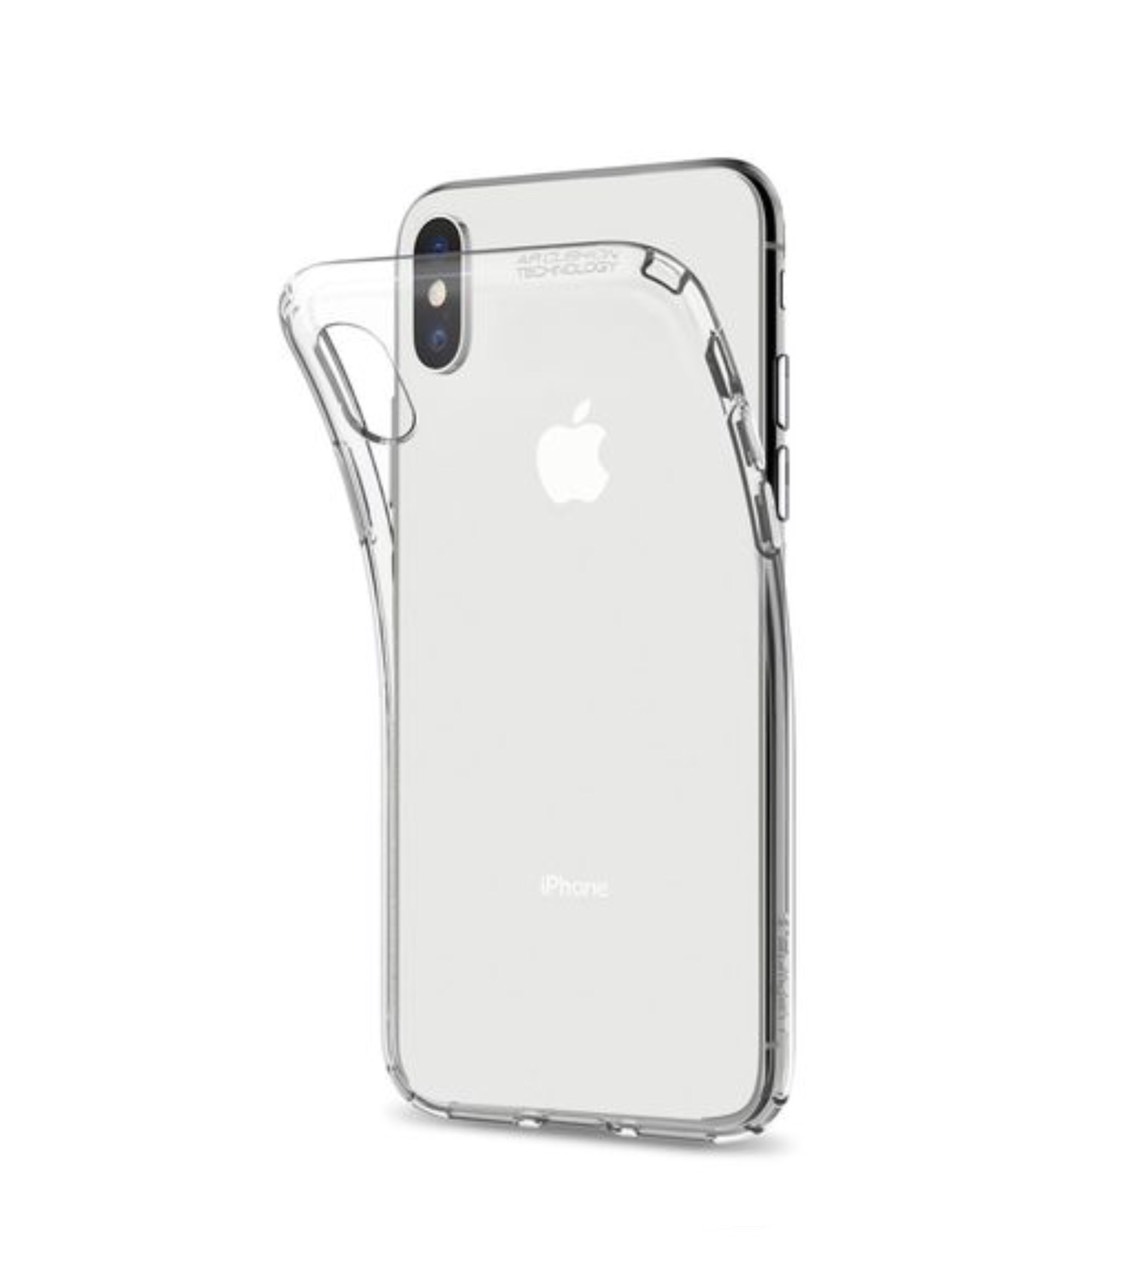 ỐP SILICON IPHONE X/XS - 139.000Đ